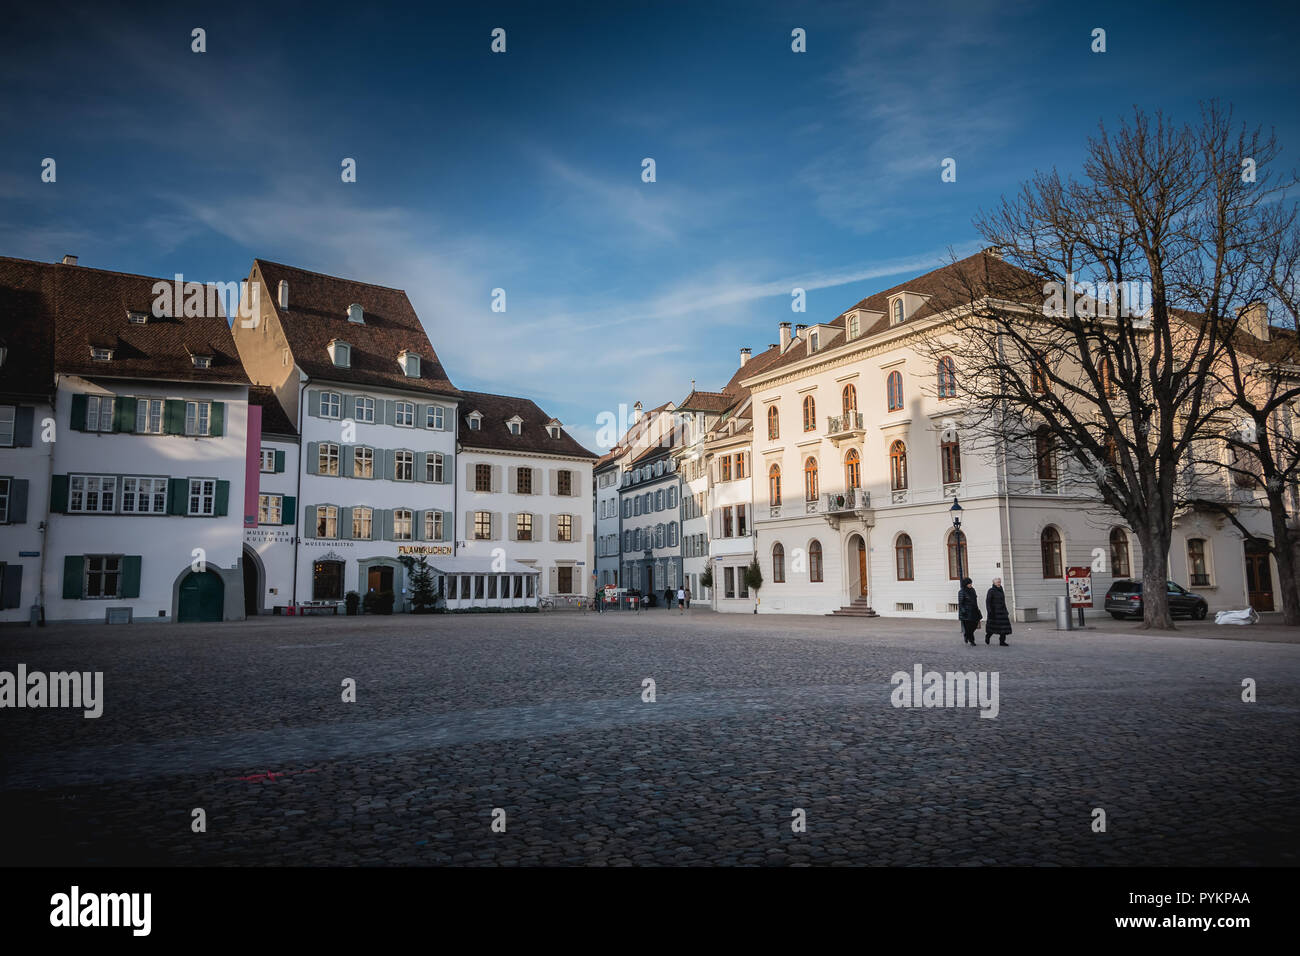 Basel, Switzerland - December 25, 2017 - Warmly dressed people walk on cathedral square on a winter's day Stock Photo